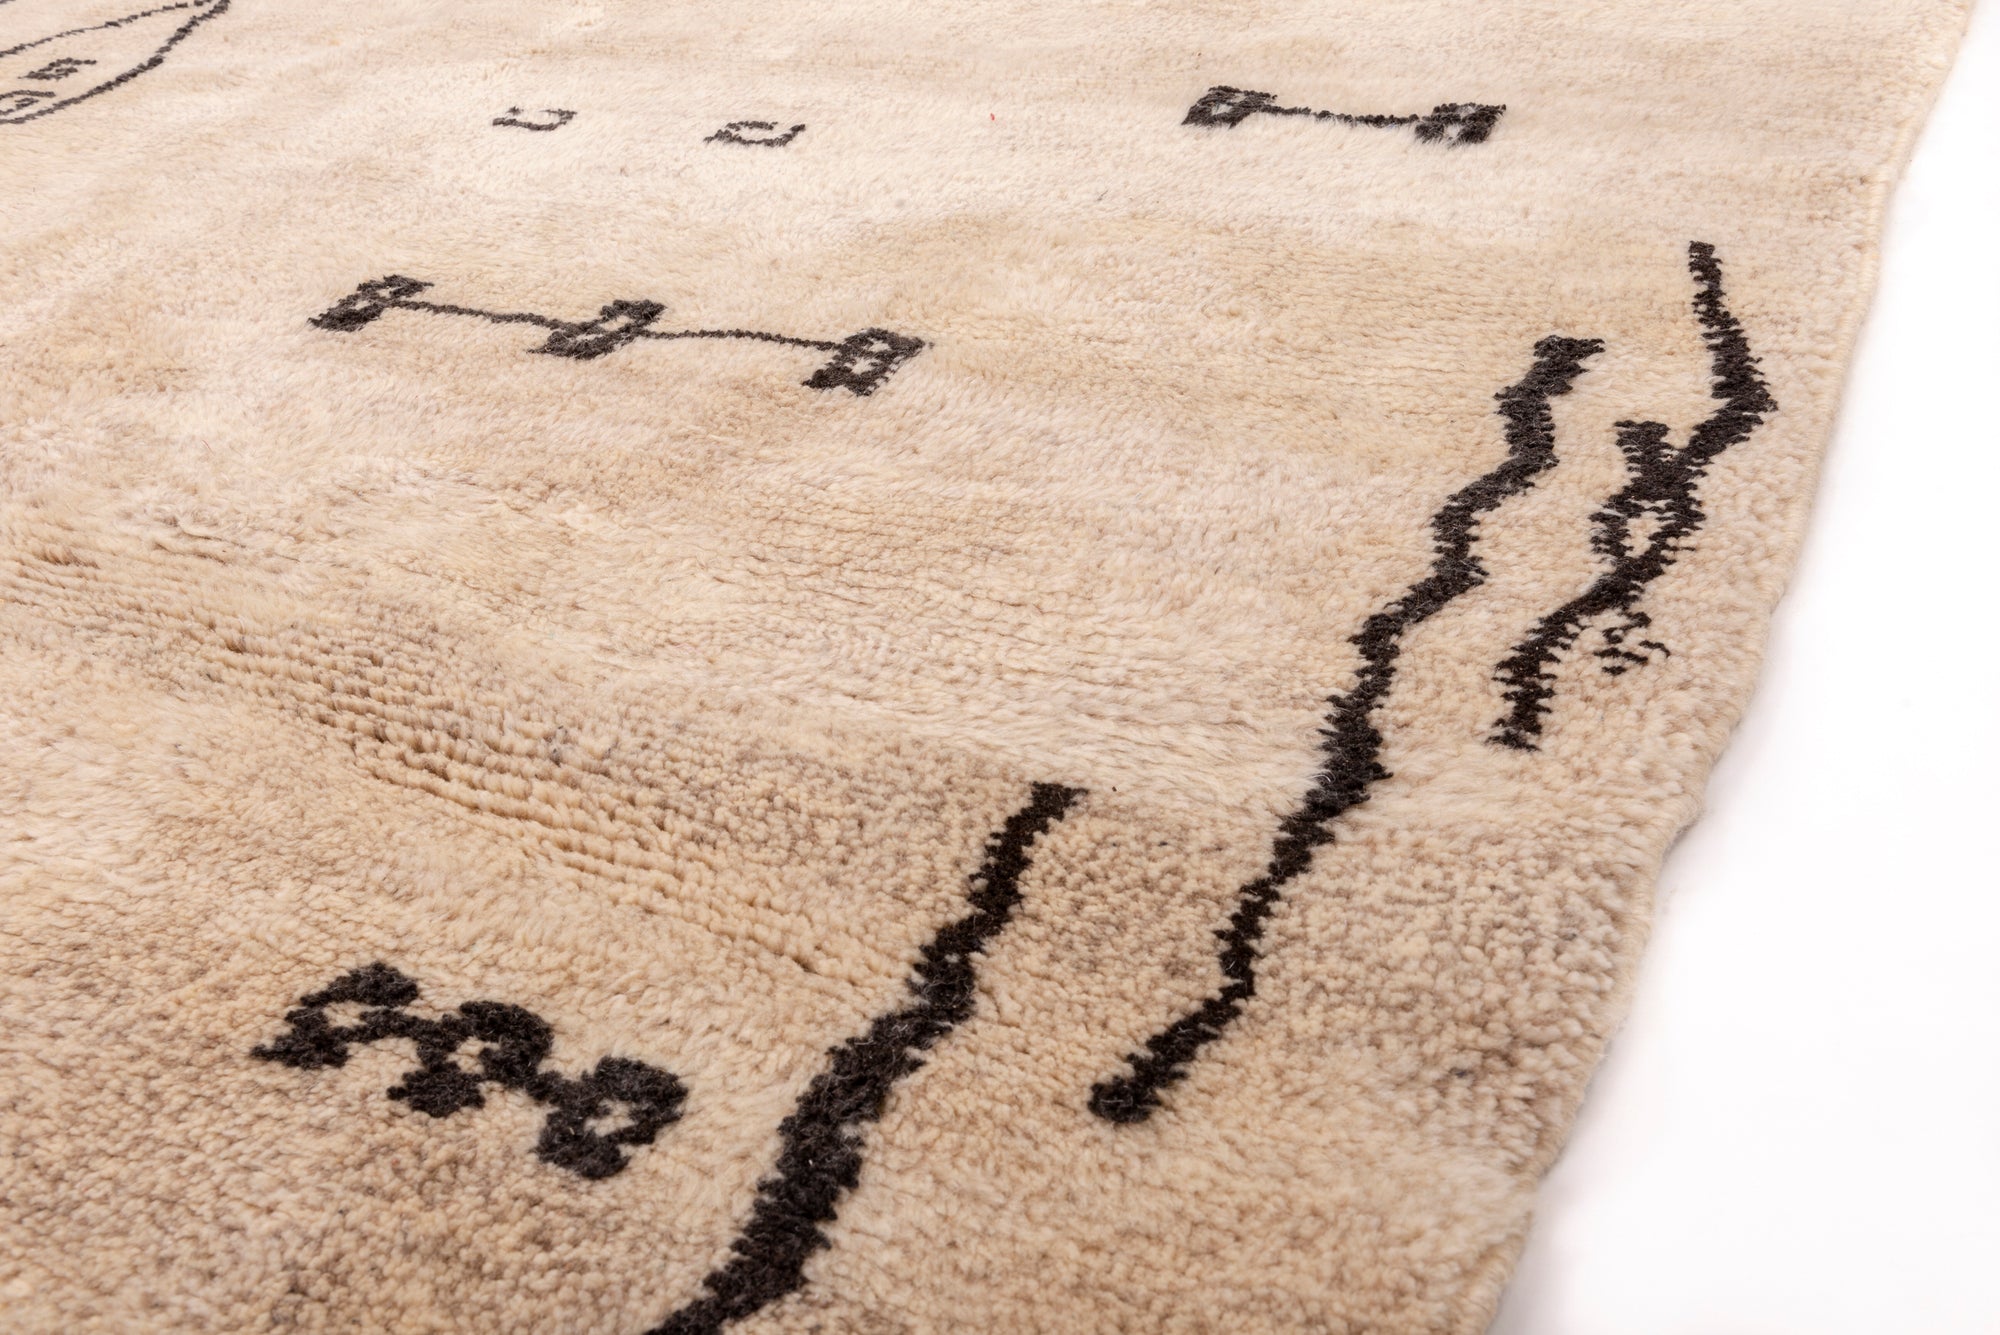 Transform your living space with our 'Ivory Homestead Berber Rug.' Crafted with an ivory base and adorned with abstract motifs reminiscent of houses and lines, this wool Berber rug brings a touch of cozy charm to your home decor.